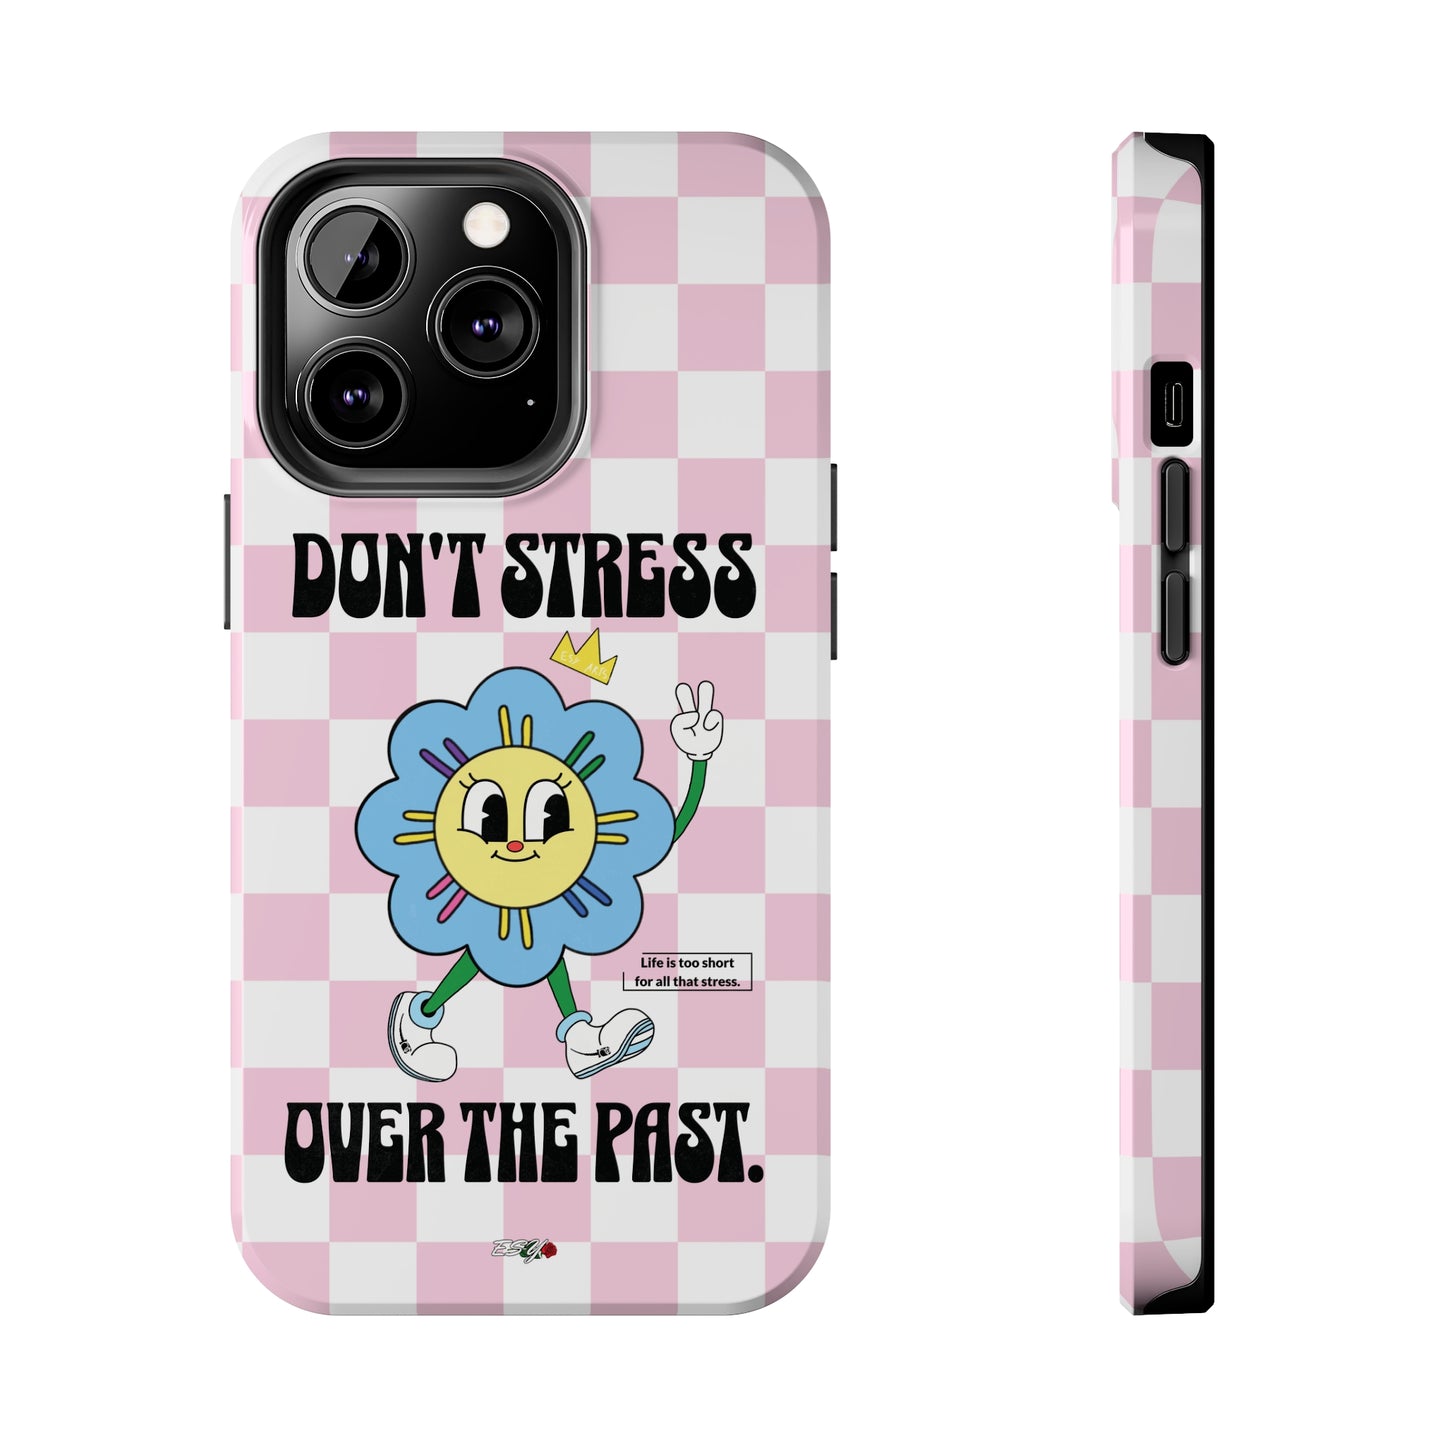 Don't stress over the past iphone case